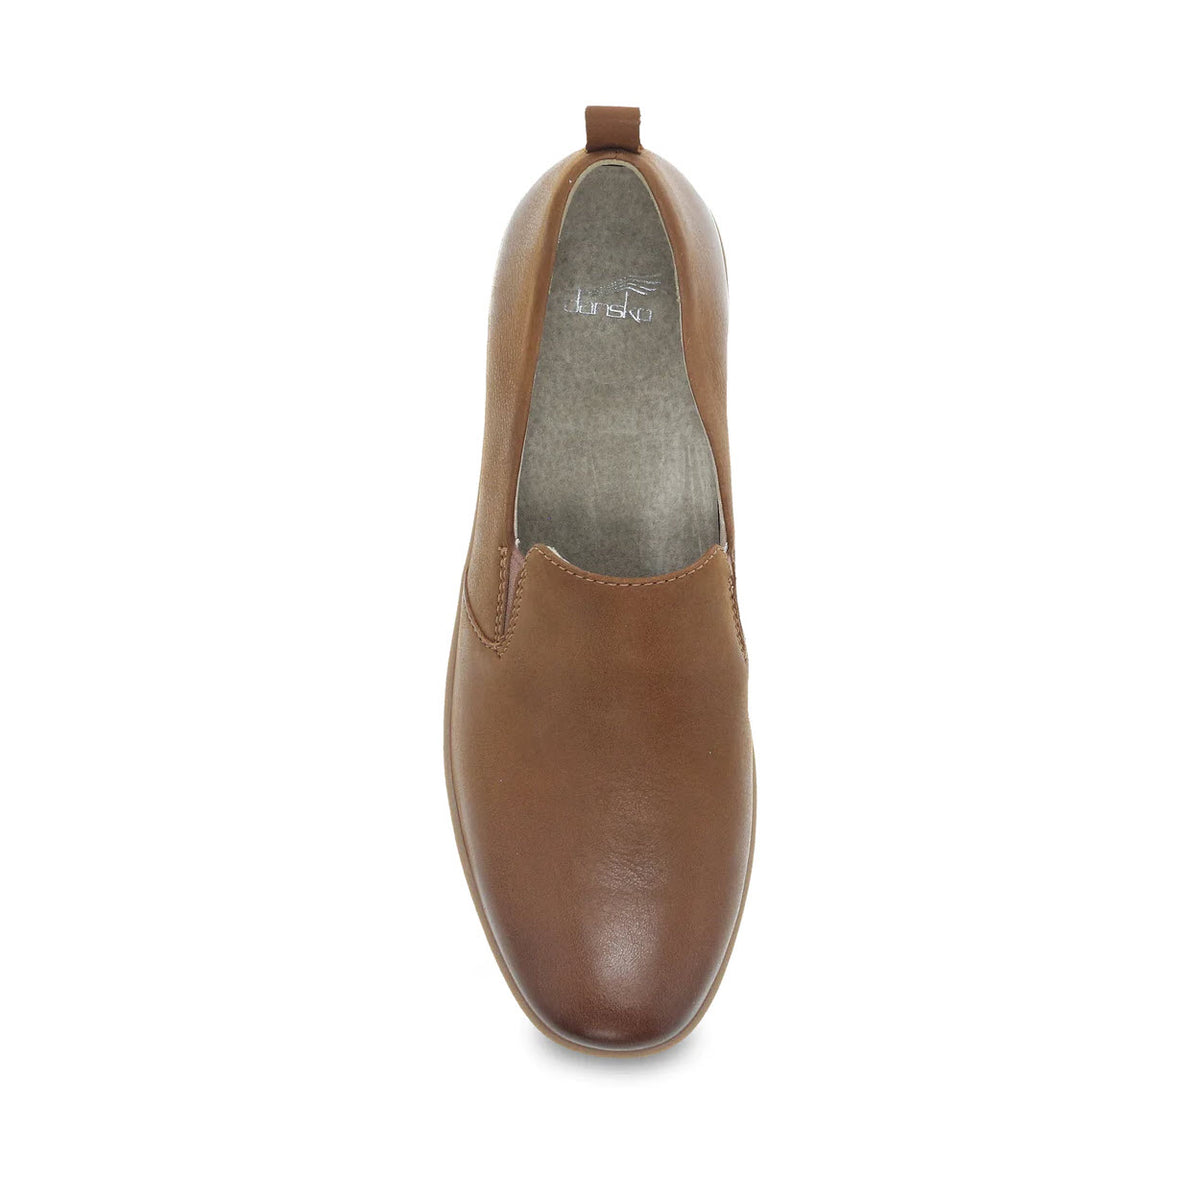 Top view of a single Dansko Linley tan burnished slip-on shoe with a molded arch shape on a white background.